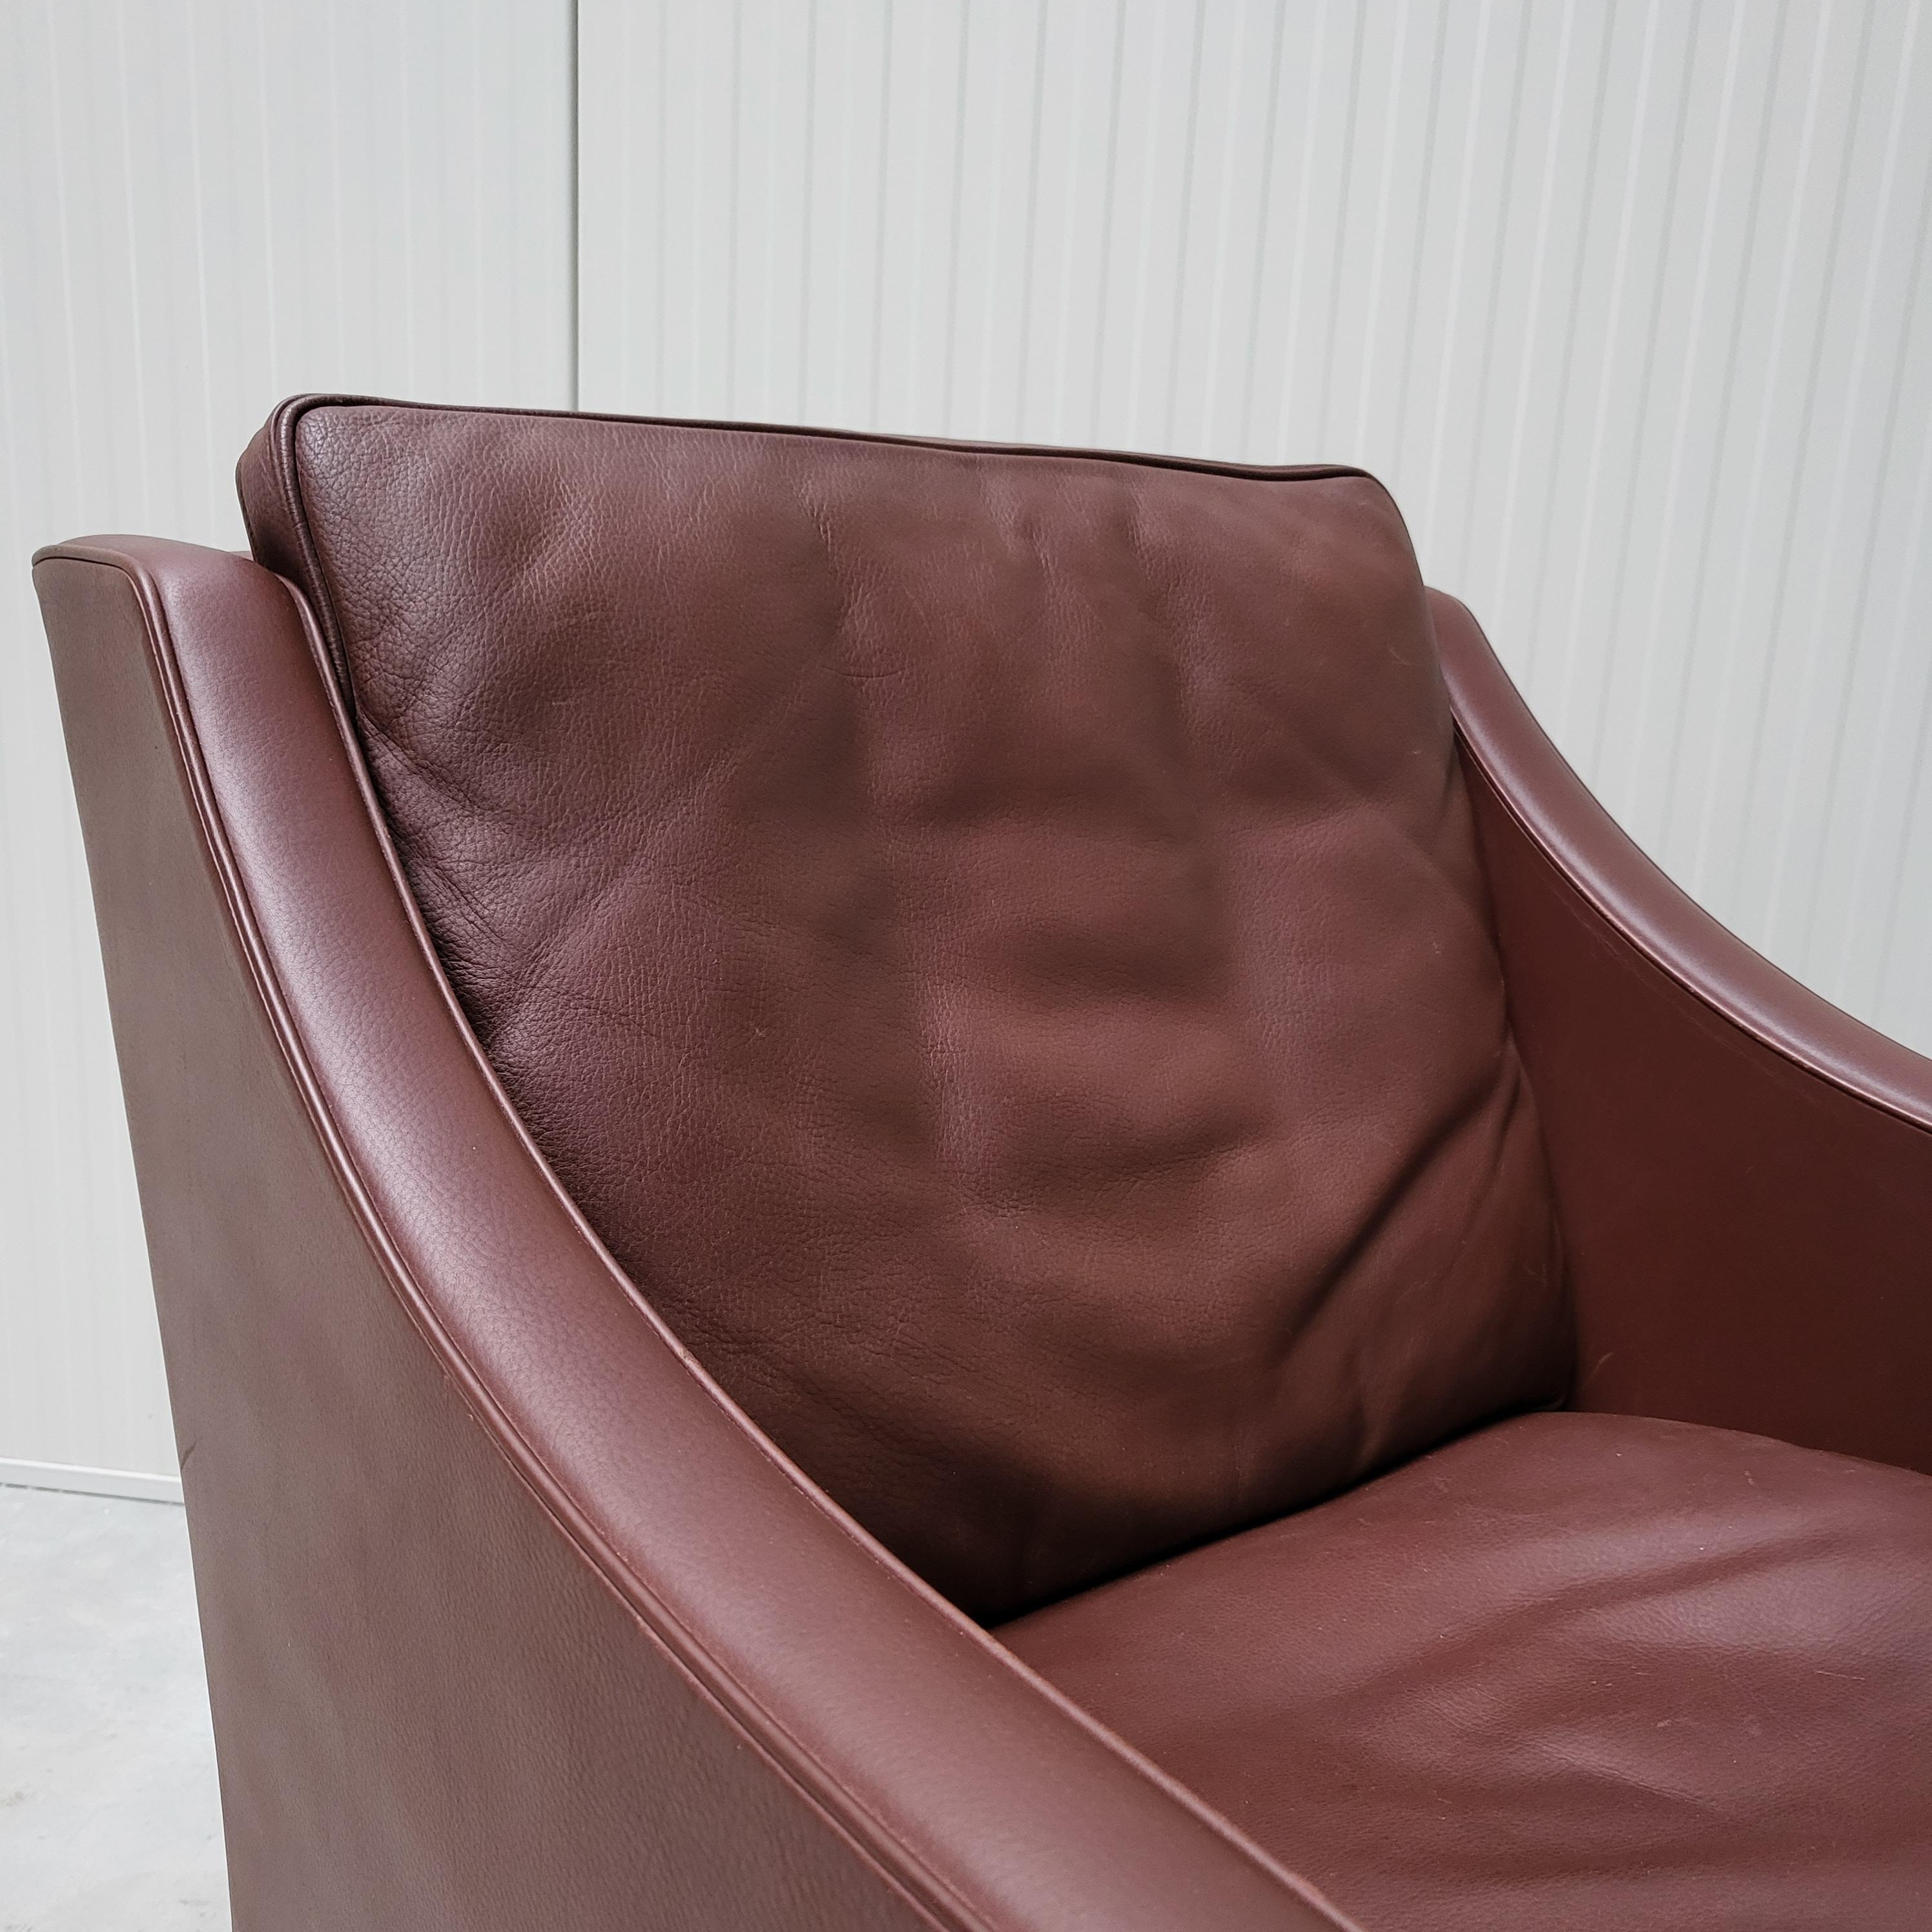 Leather Børge Mogensen for Fredericia Club Chairs Mod. 2207 Denmark 1960s